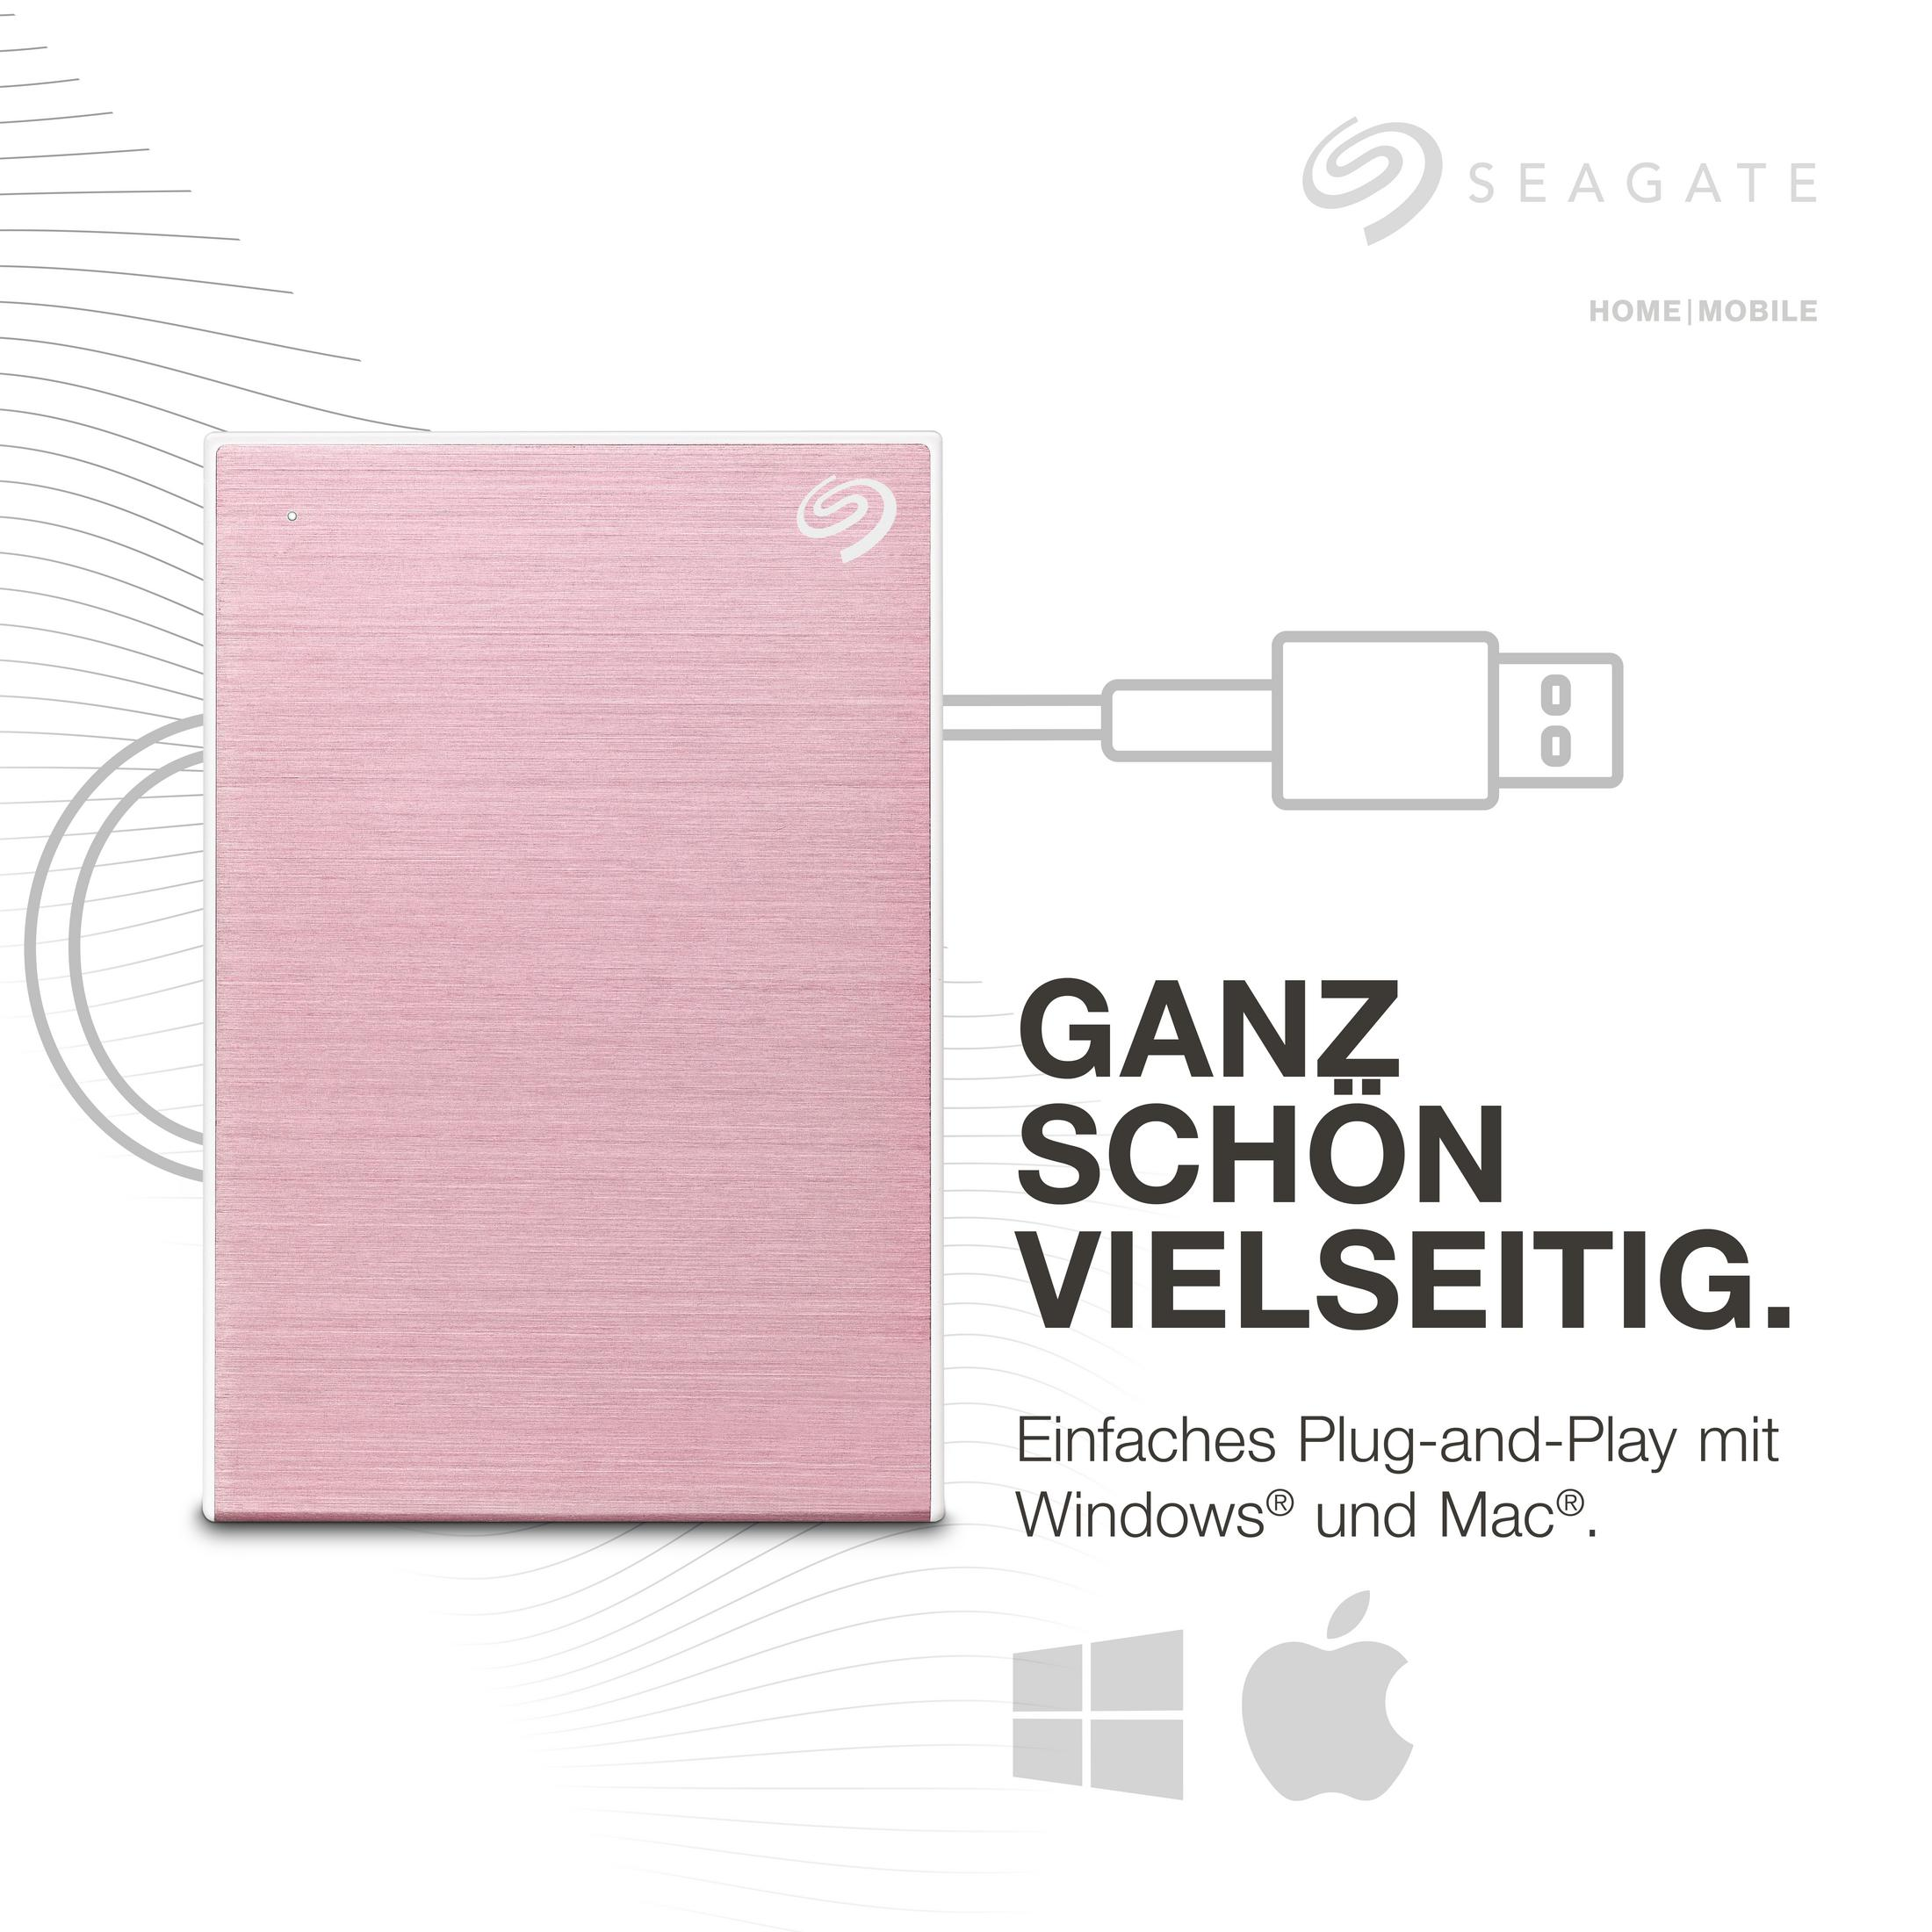 SEAGATE STKY2000405 ONE TOUCH 2TB HDD, TB Rosegold 2 Zoll, GOLD, 2,5 ROSE extern